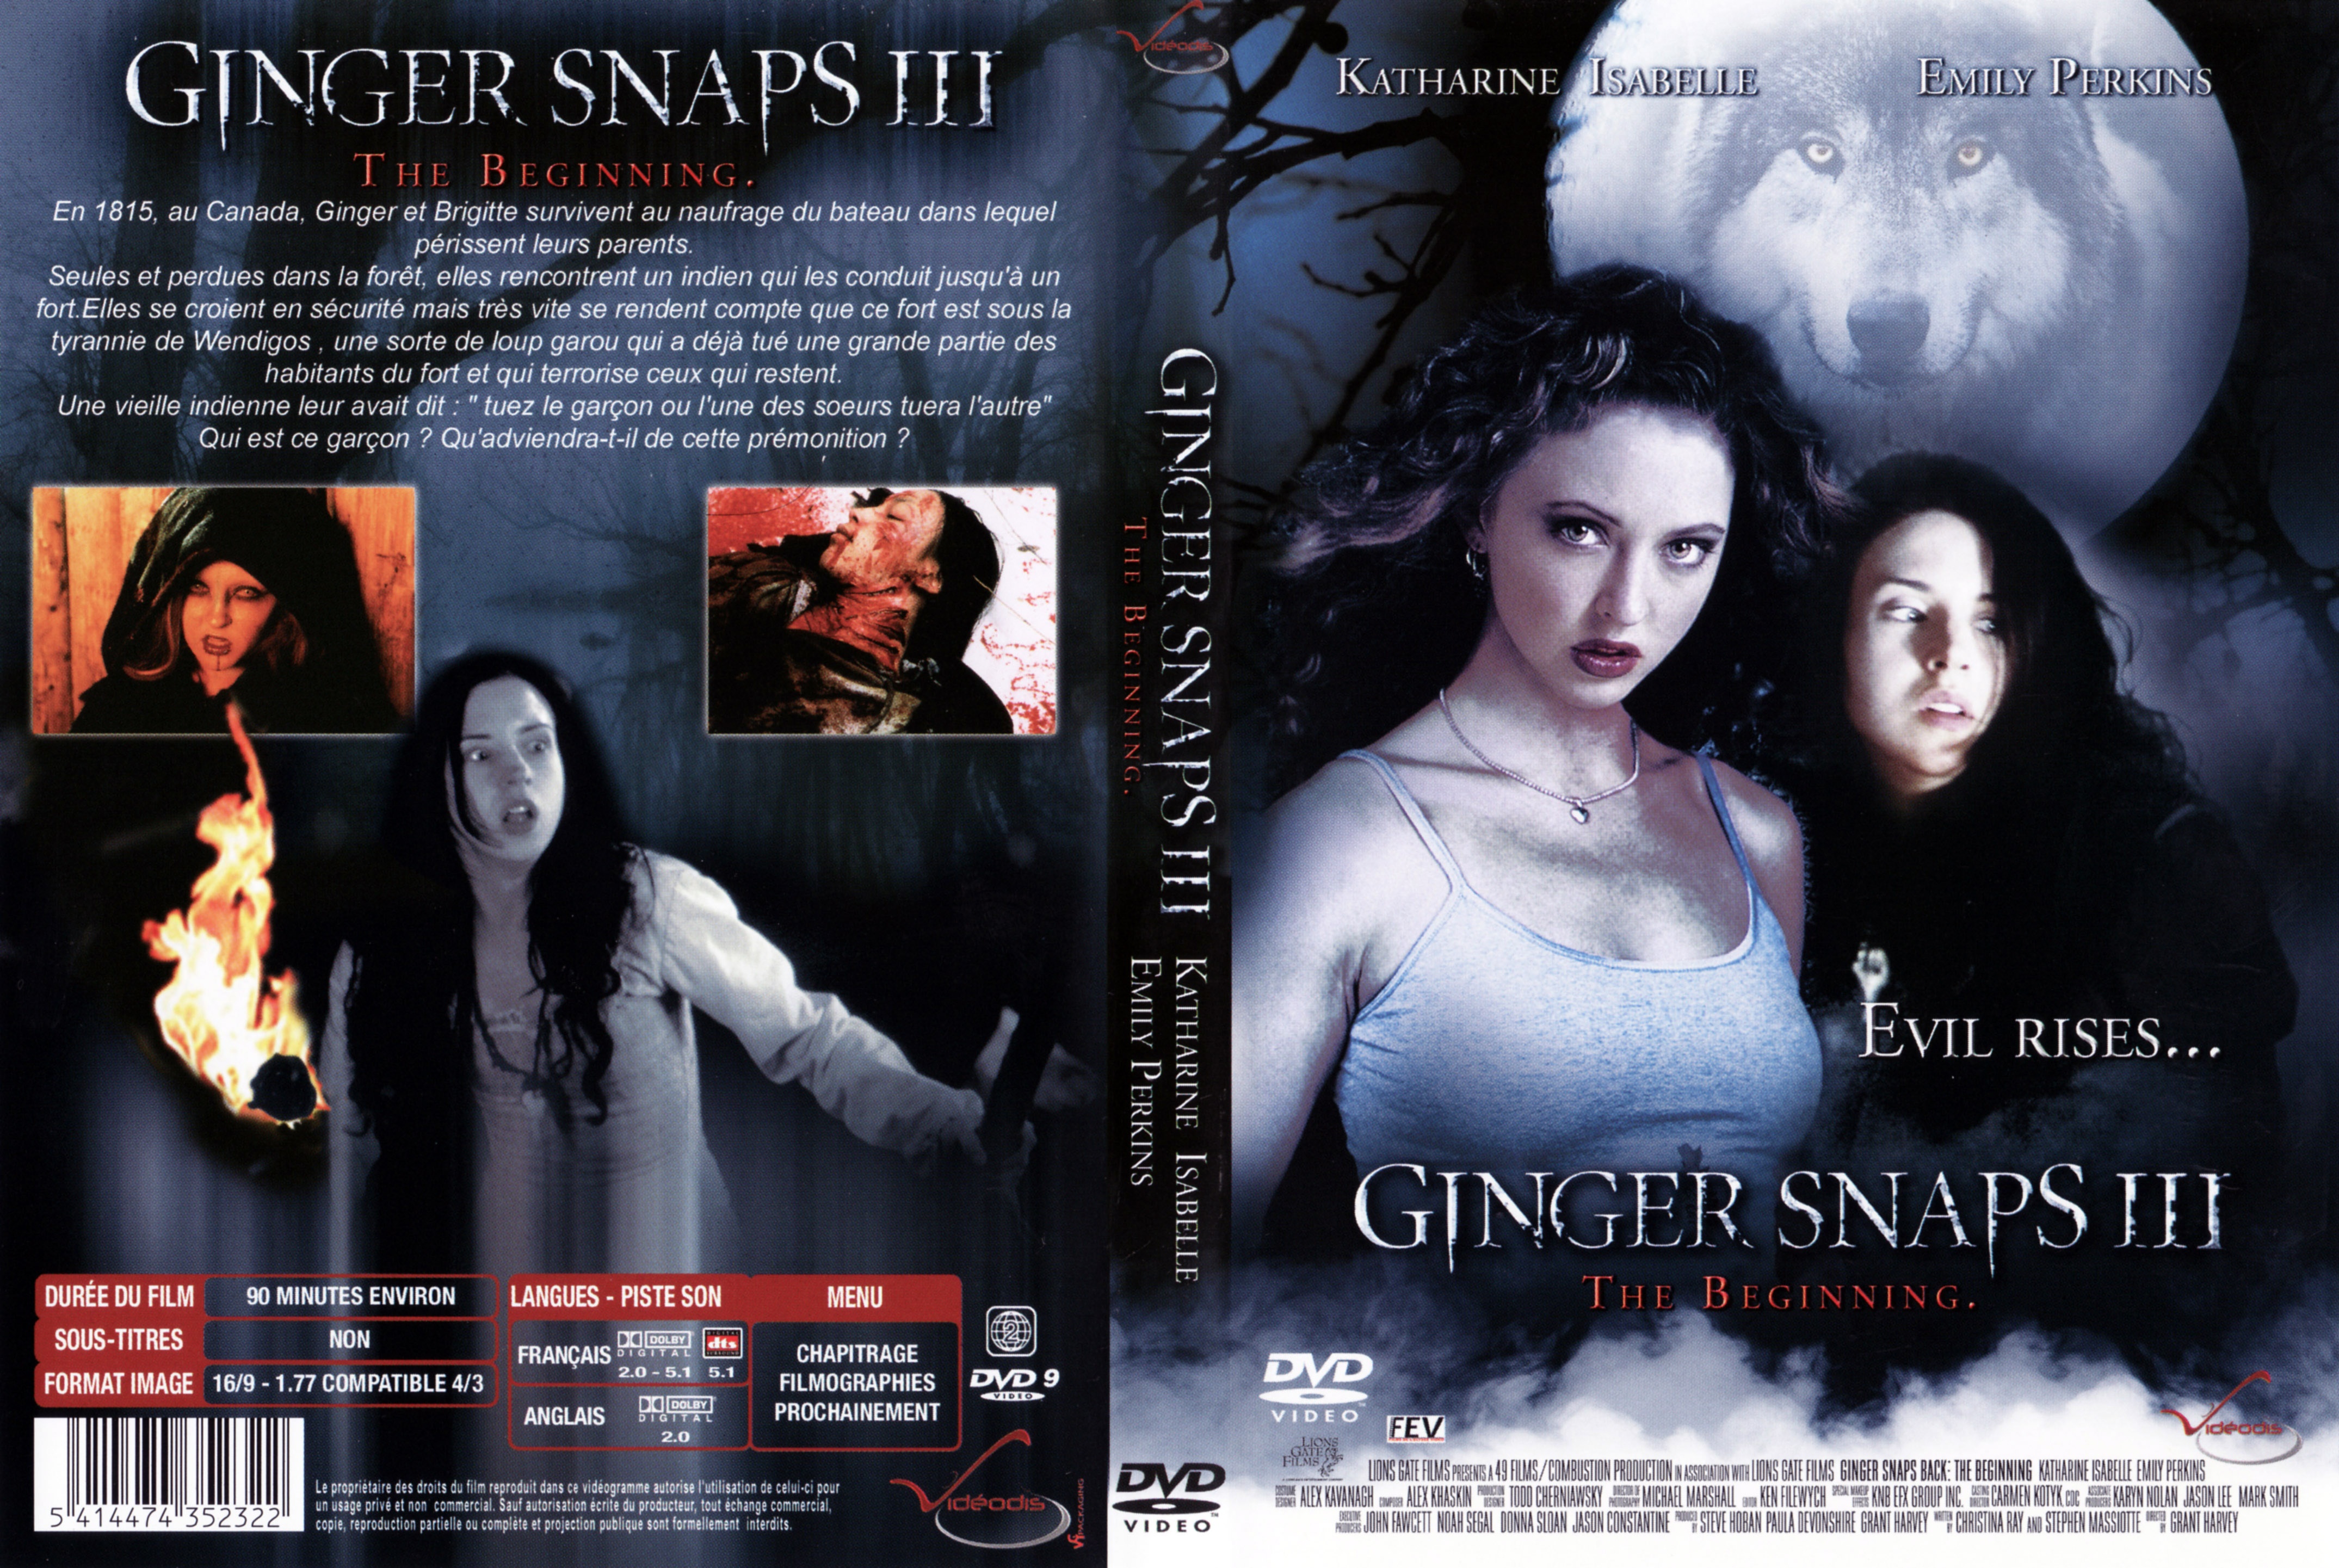 Jaquette DVD Ginger snaps 3